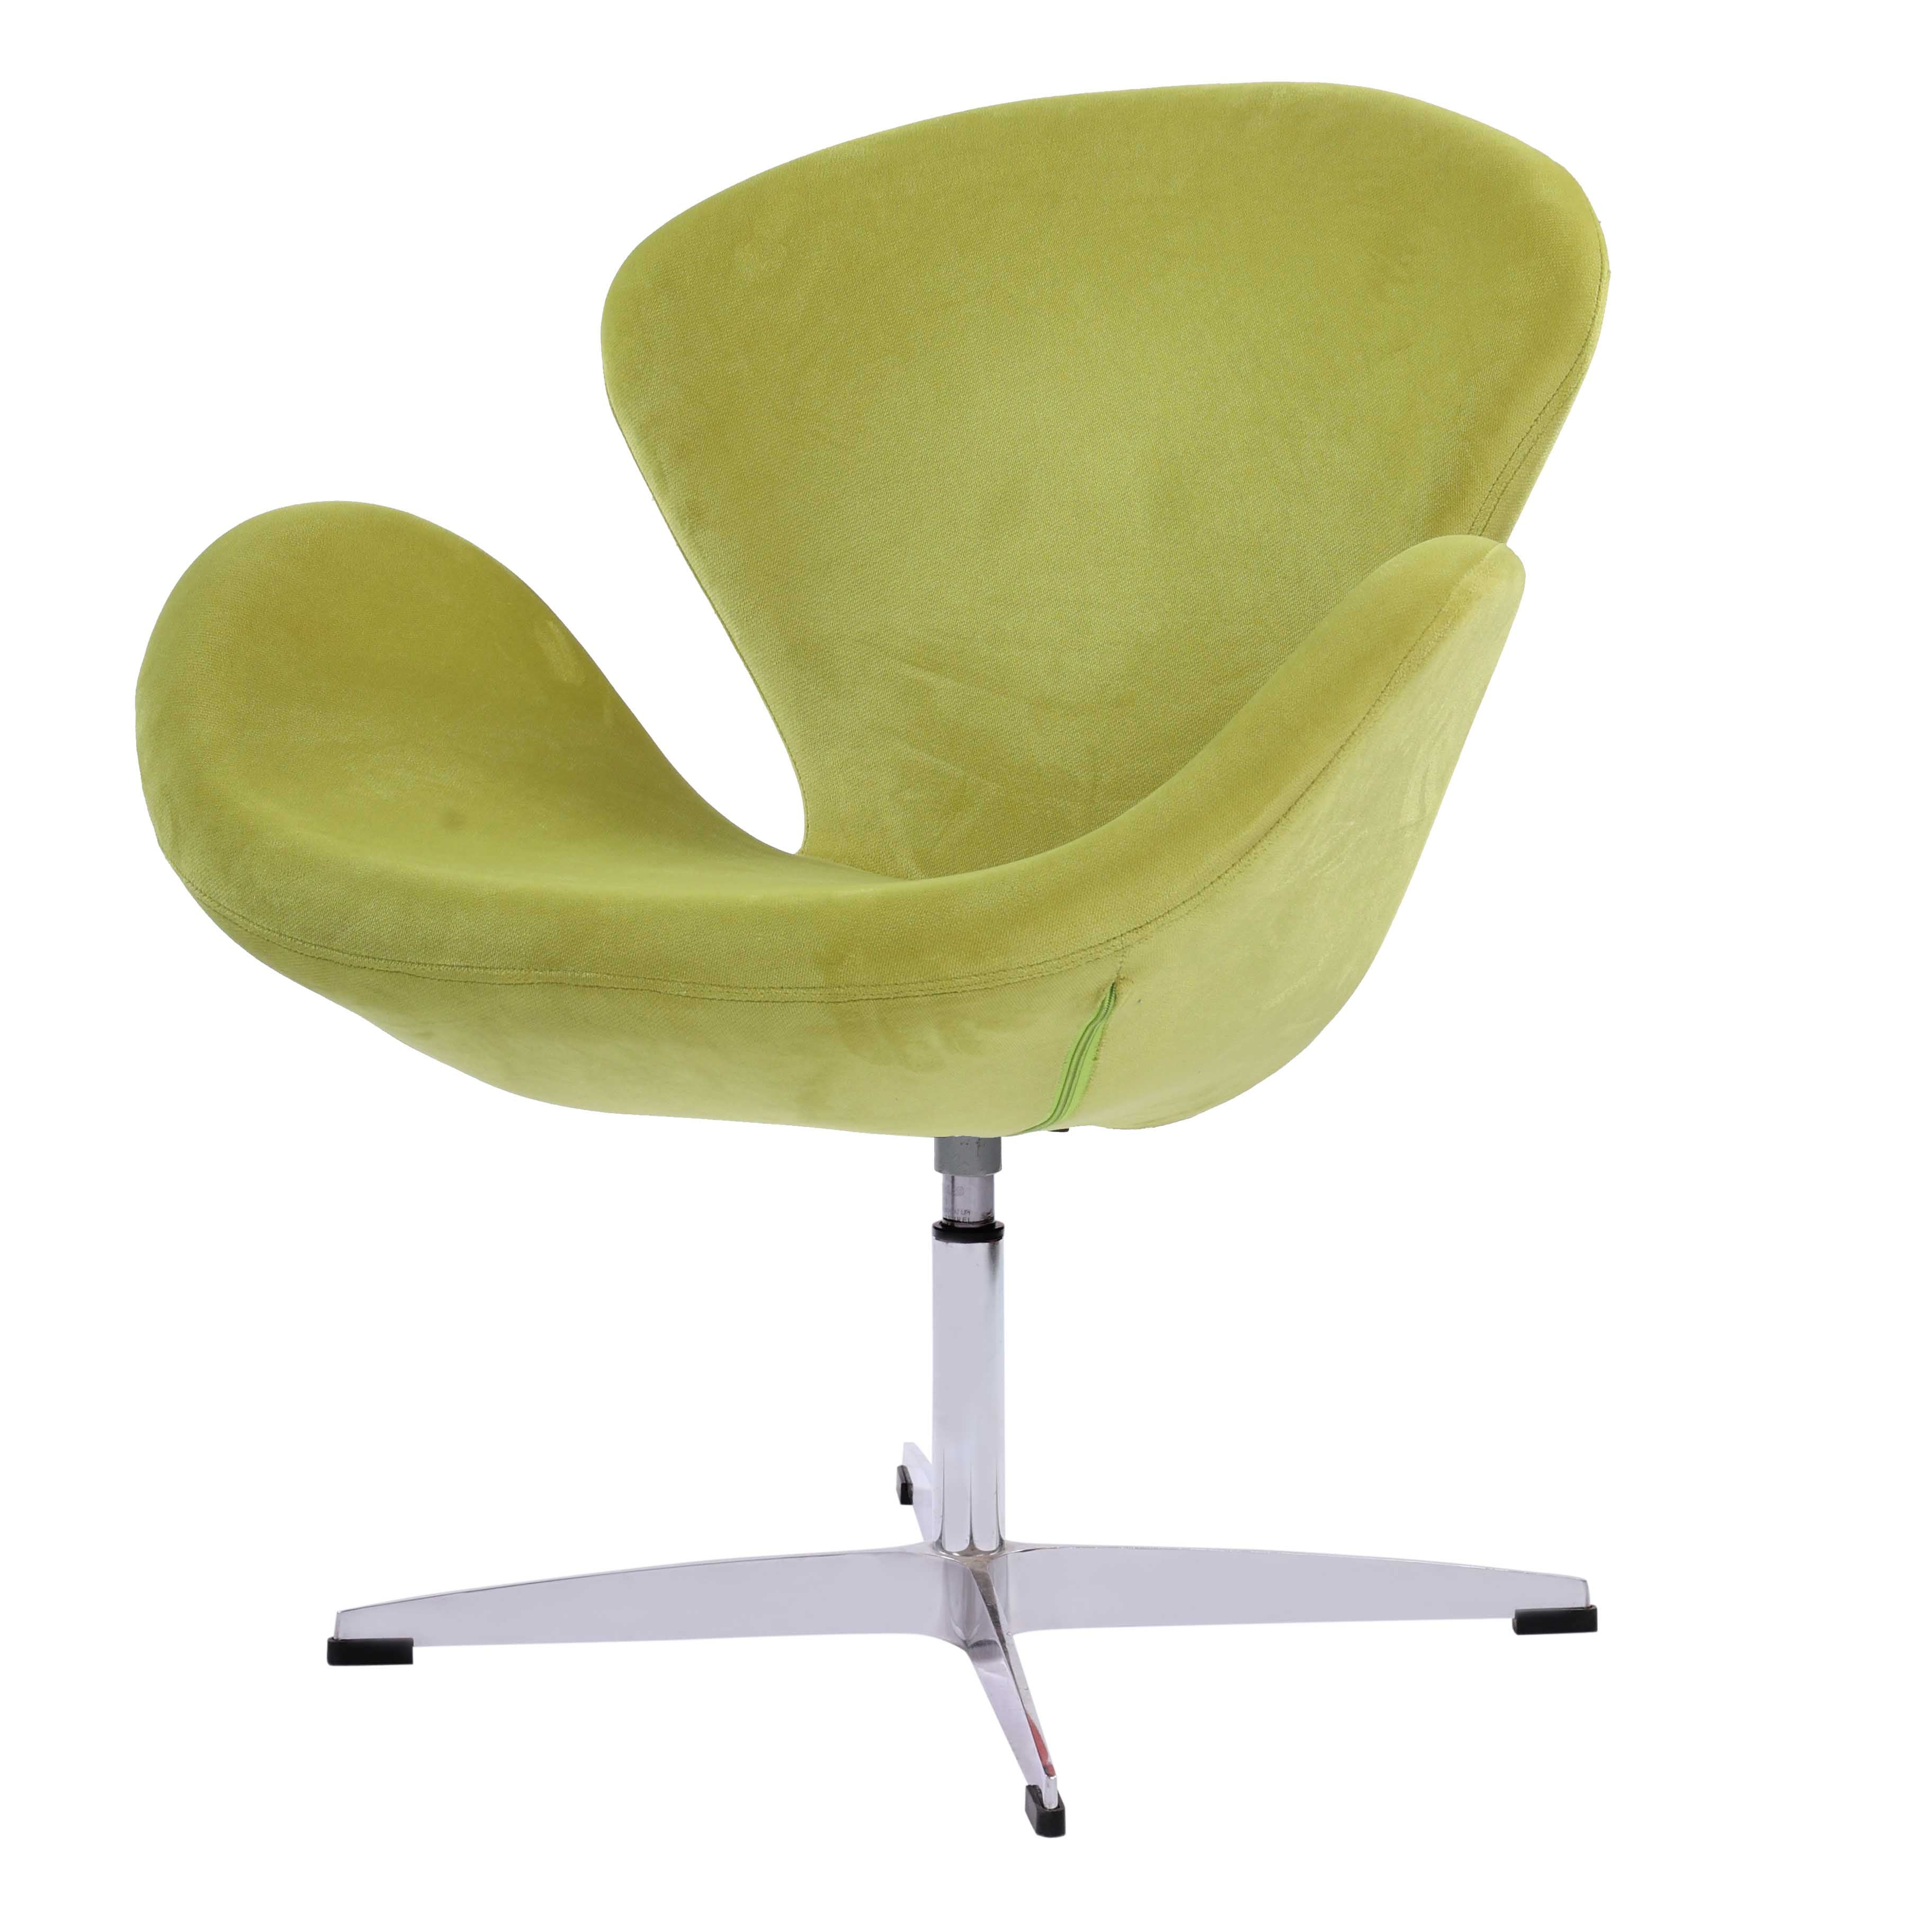 Siri Accent Fabric Upholstered Lounge Chair - Green Chair urbancart